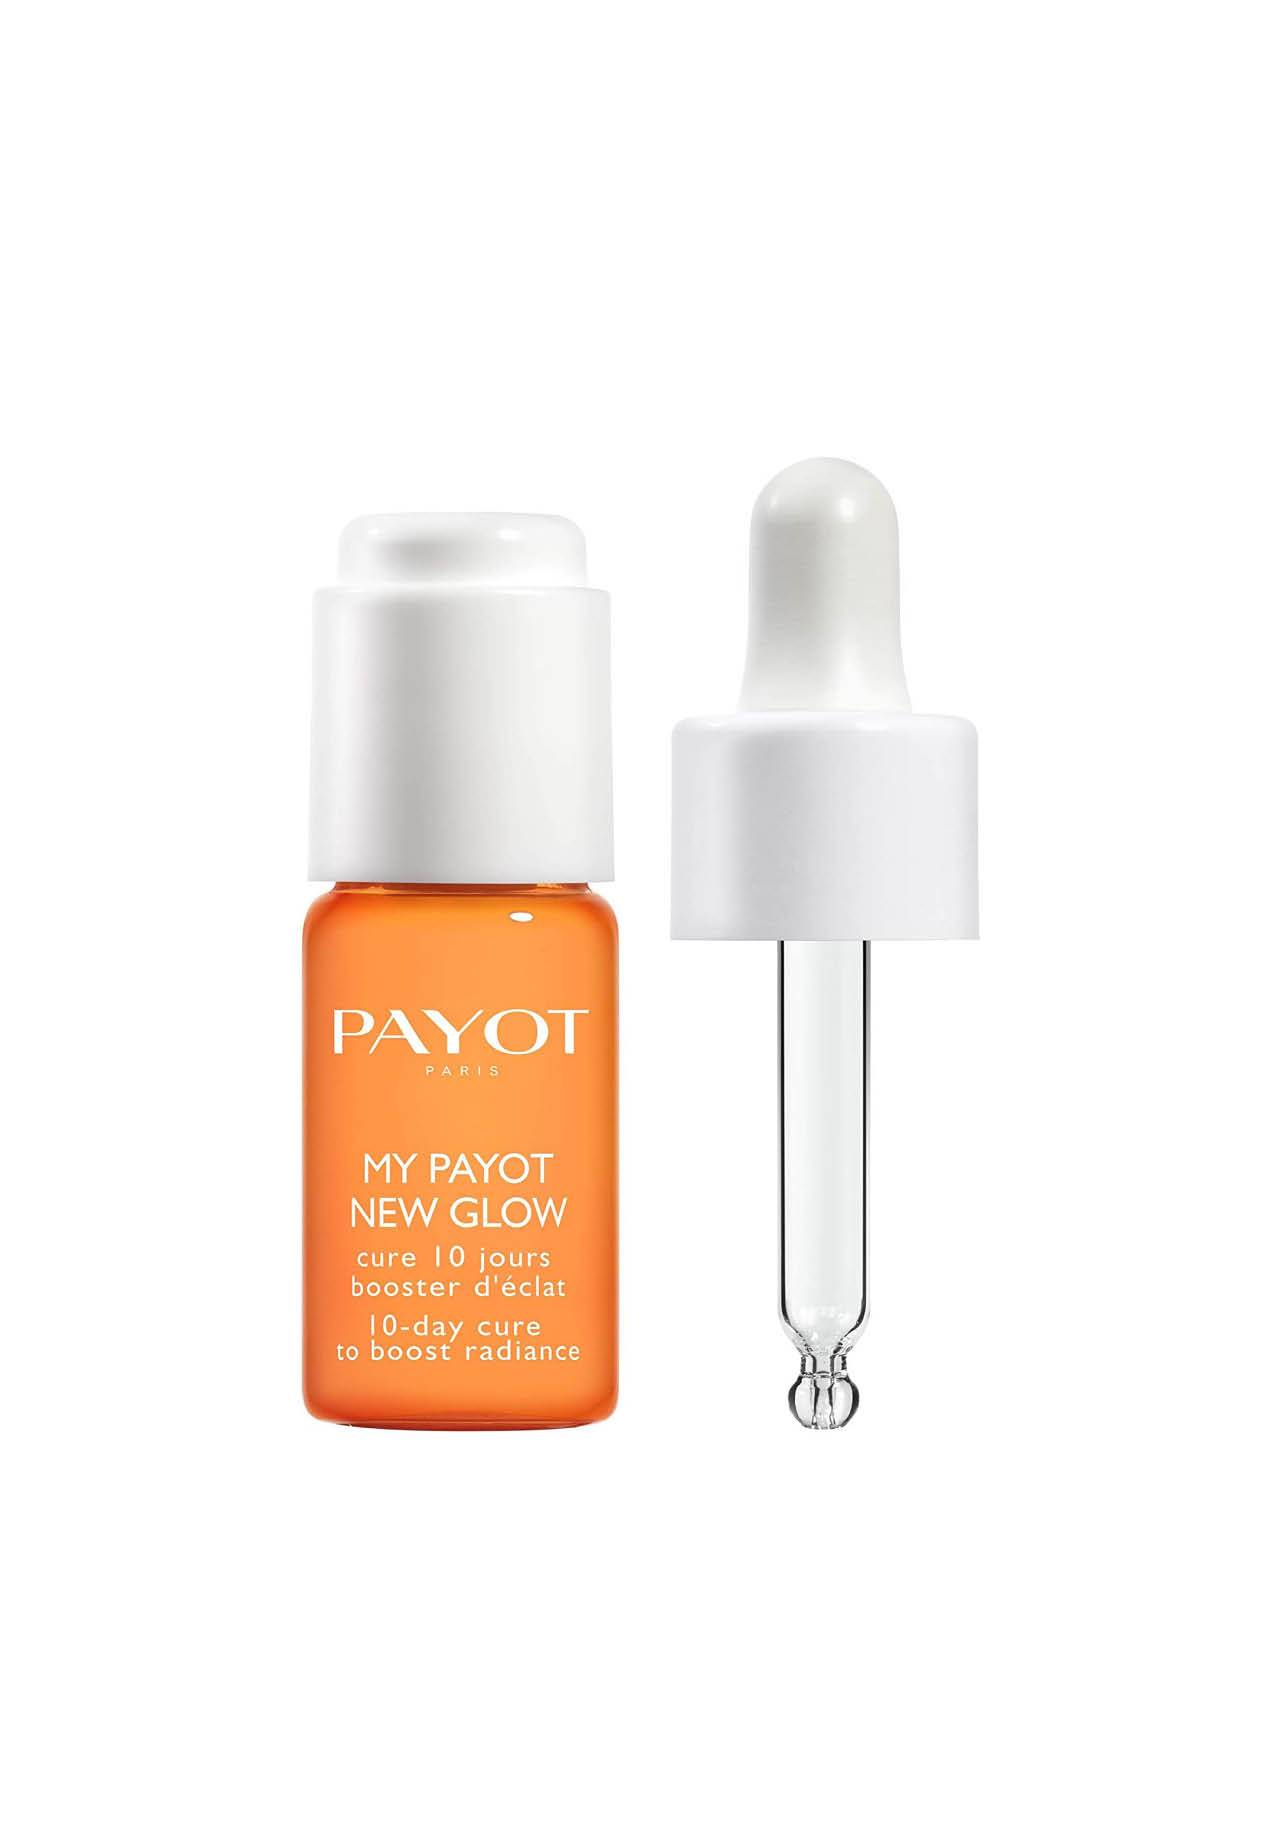 Cosmética boosters Booster My Payot New Glow de Payot